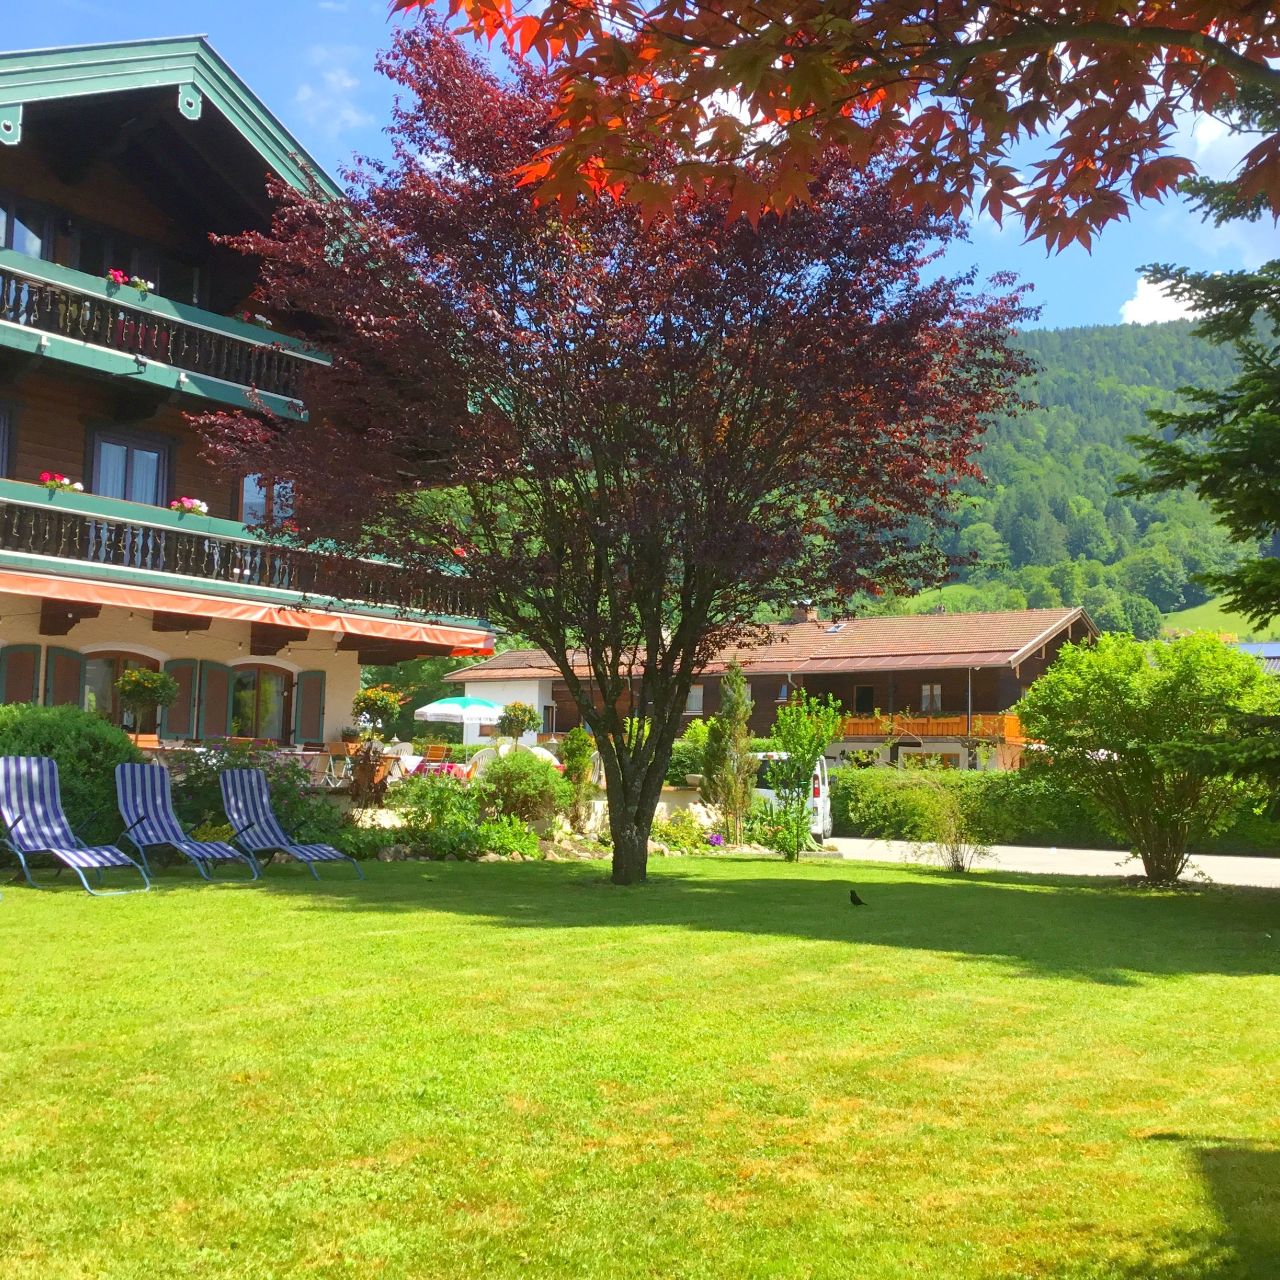 Hotel Zellerwirt - Ruhpolding - Great prices at HOTEL INFO